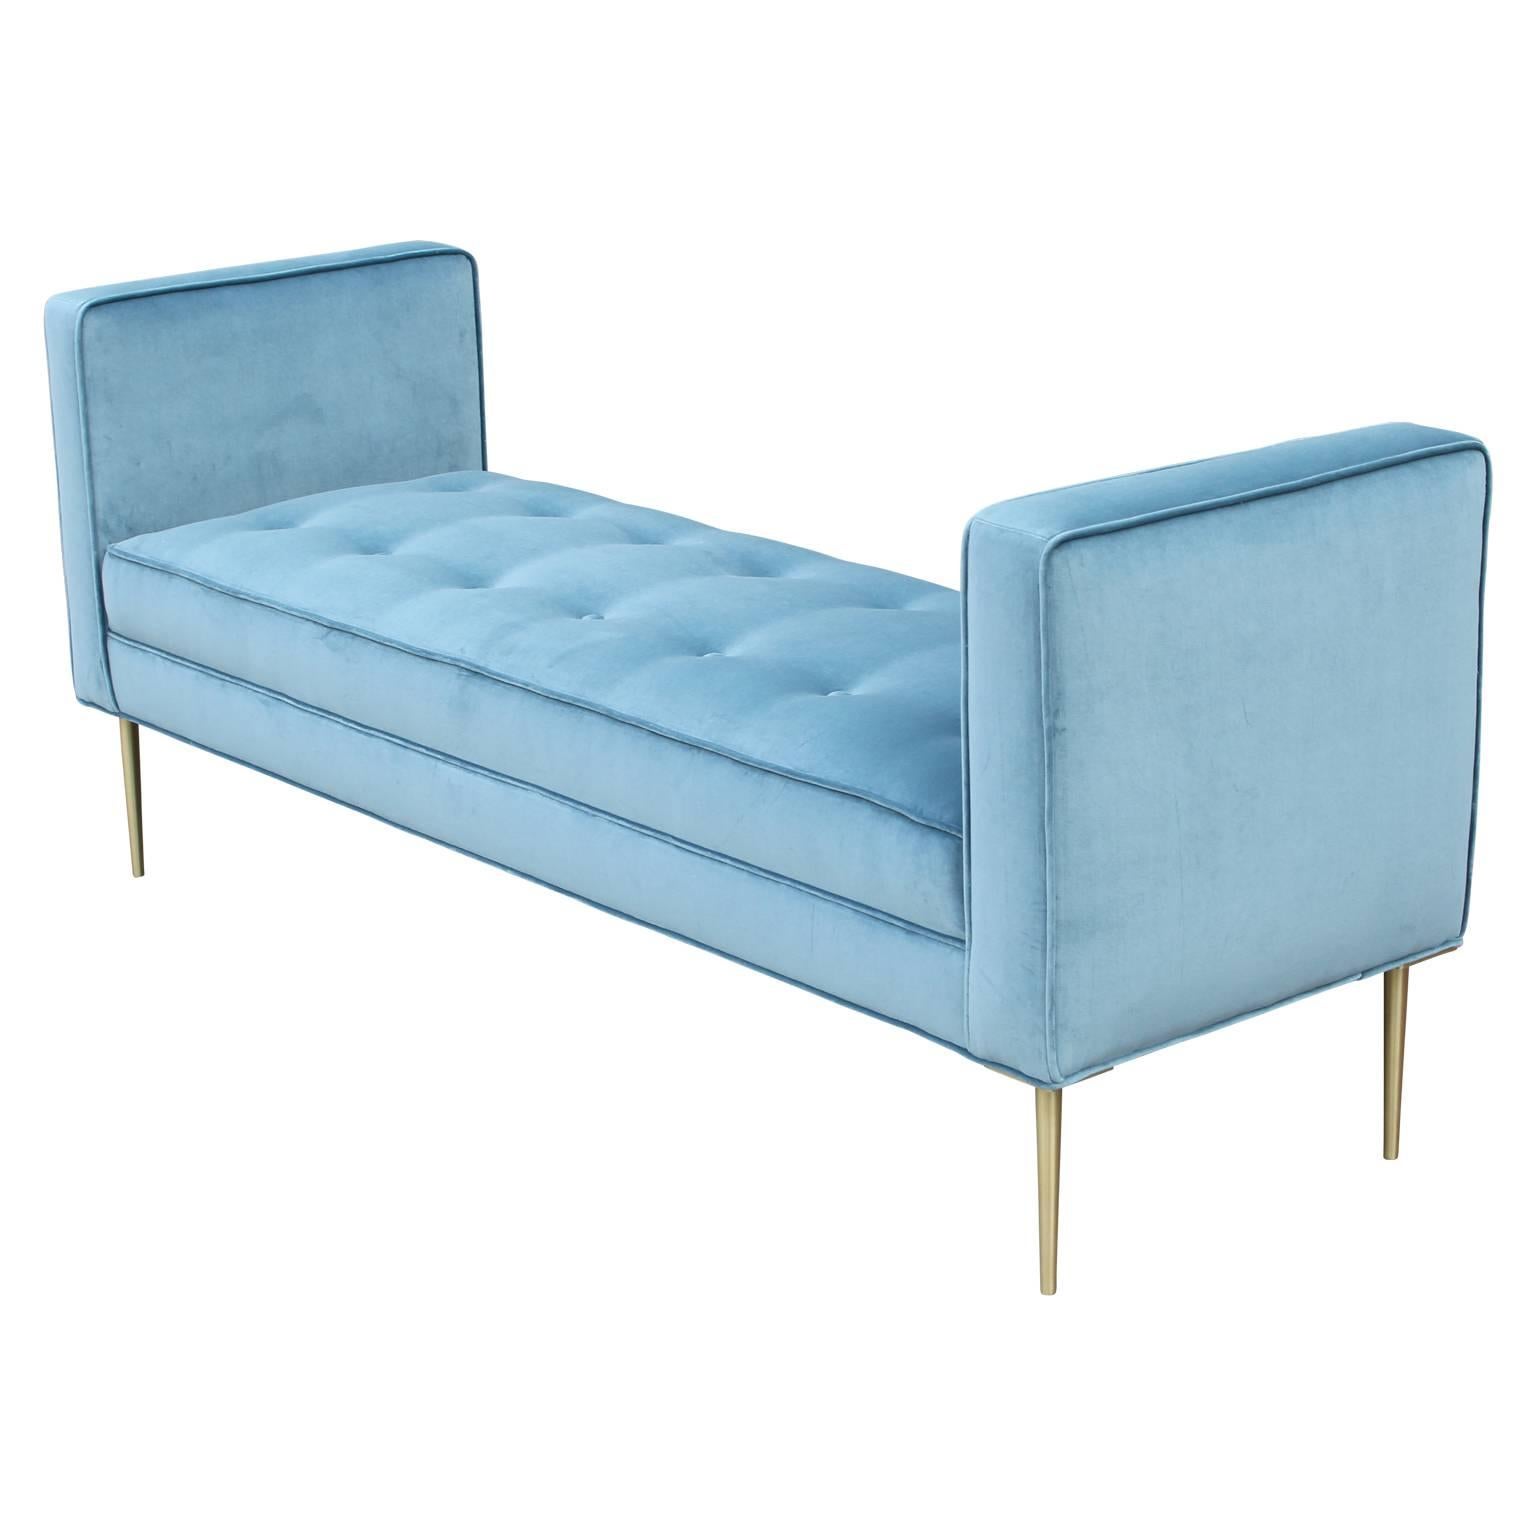 Beautiful armed bench upholstered in a luscious periwinkle blue velvet with brushed brass legs.